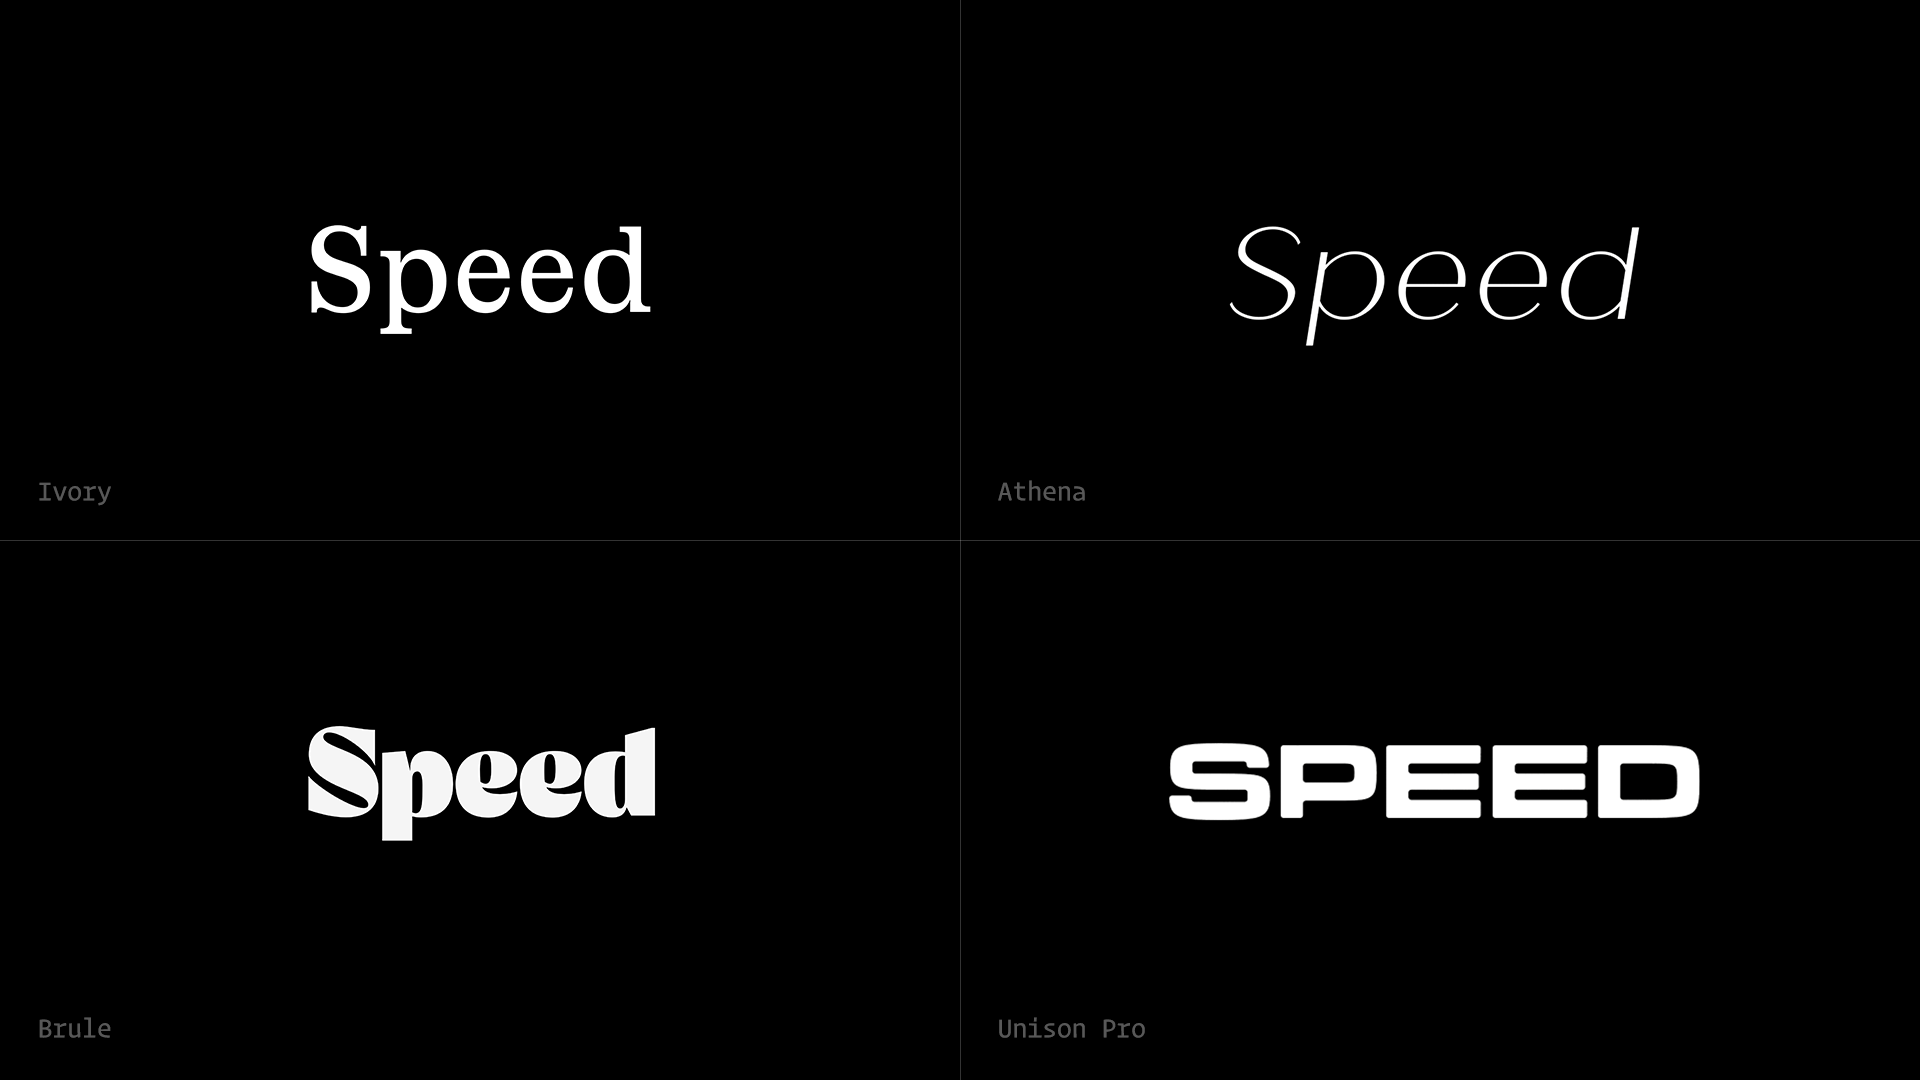 The word “Speed” set in four different typefaces: Ivory, Athena, Brule, and Unison Pro